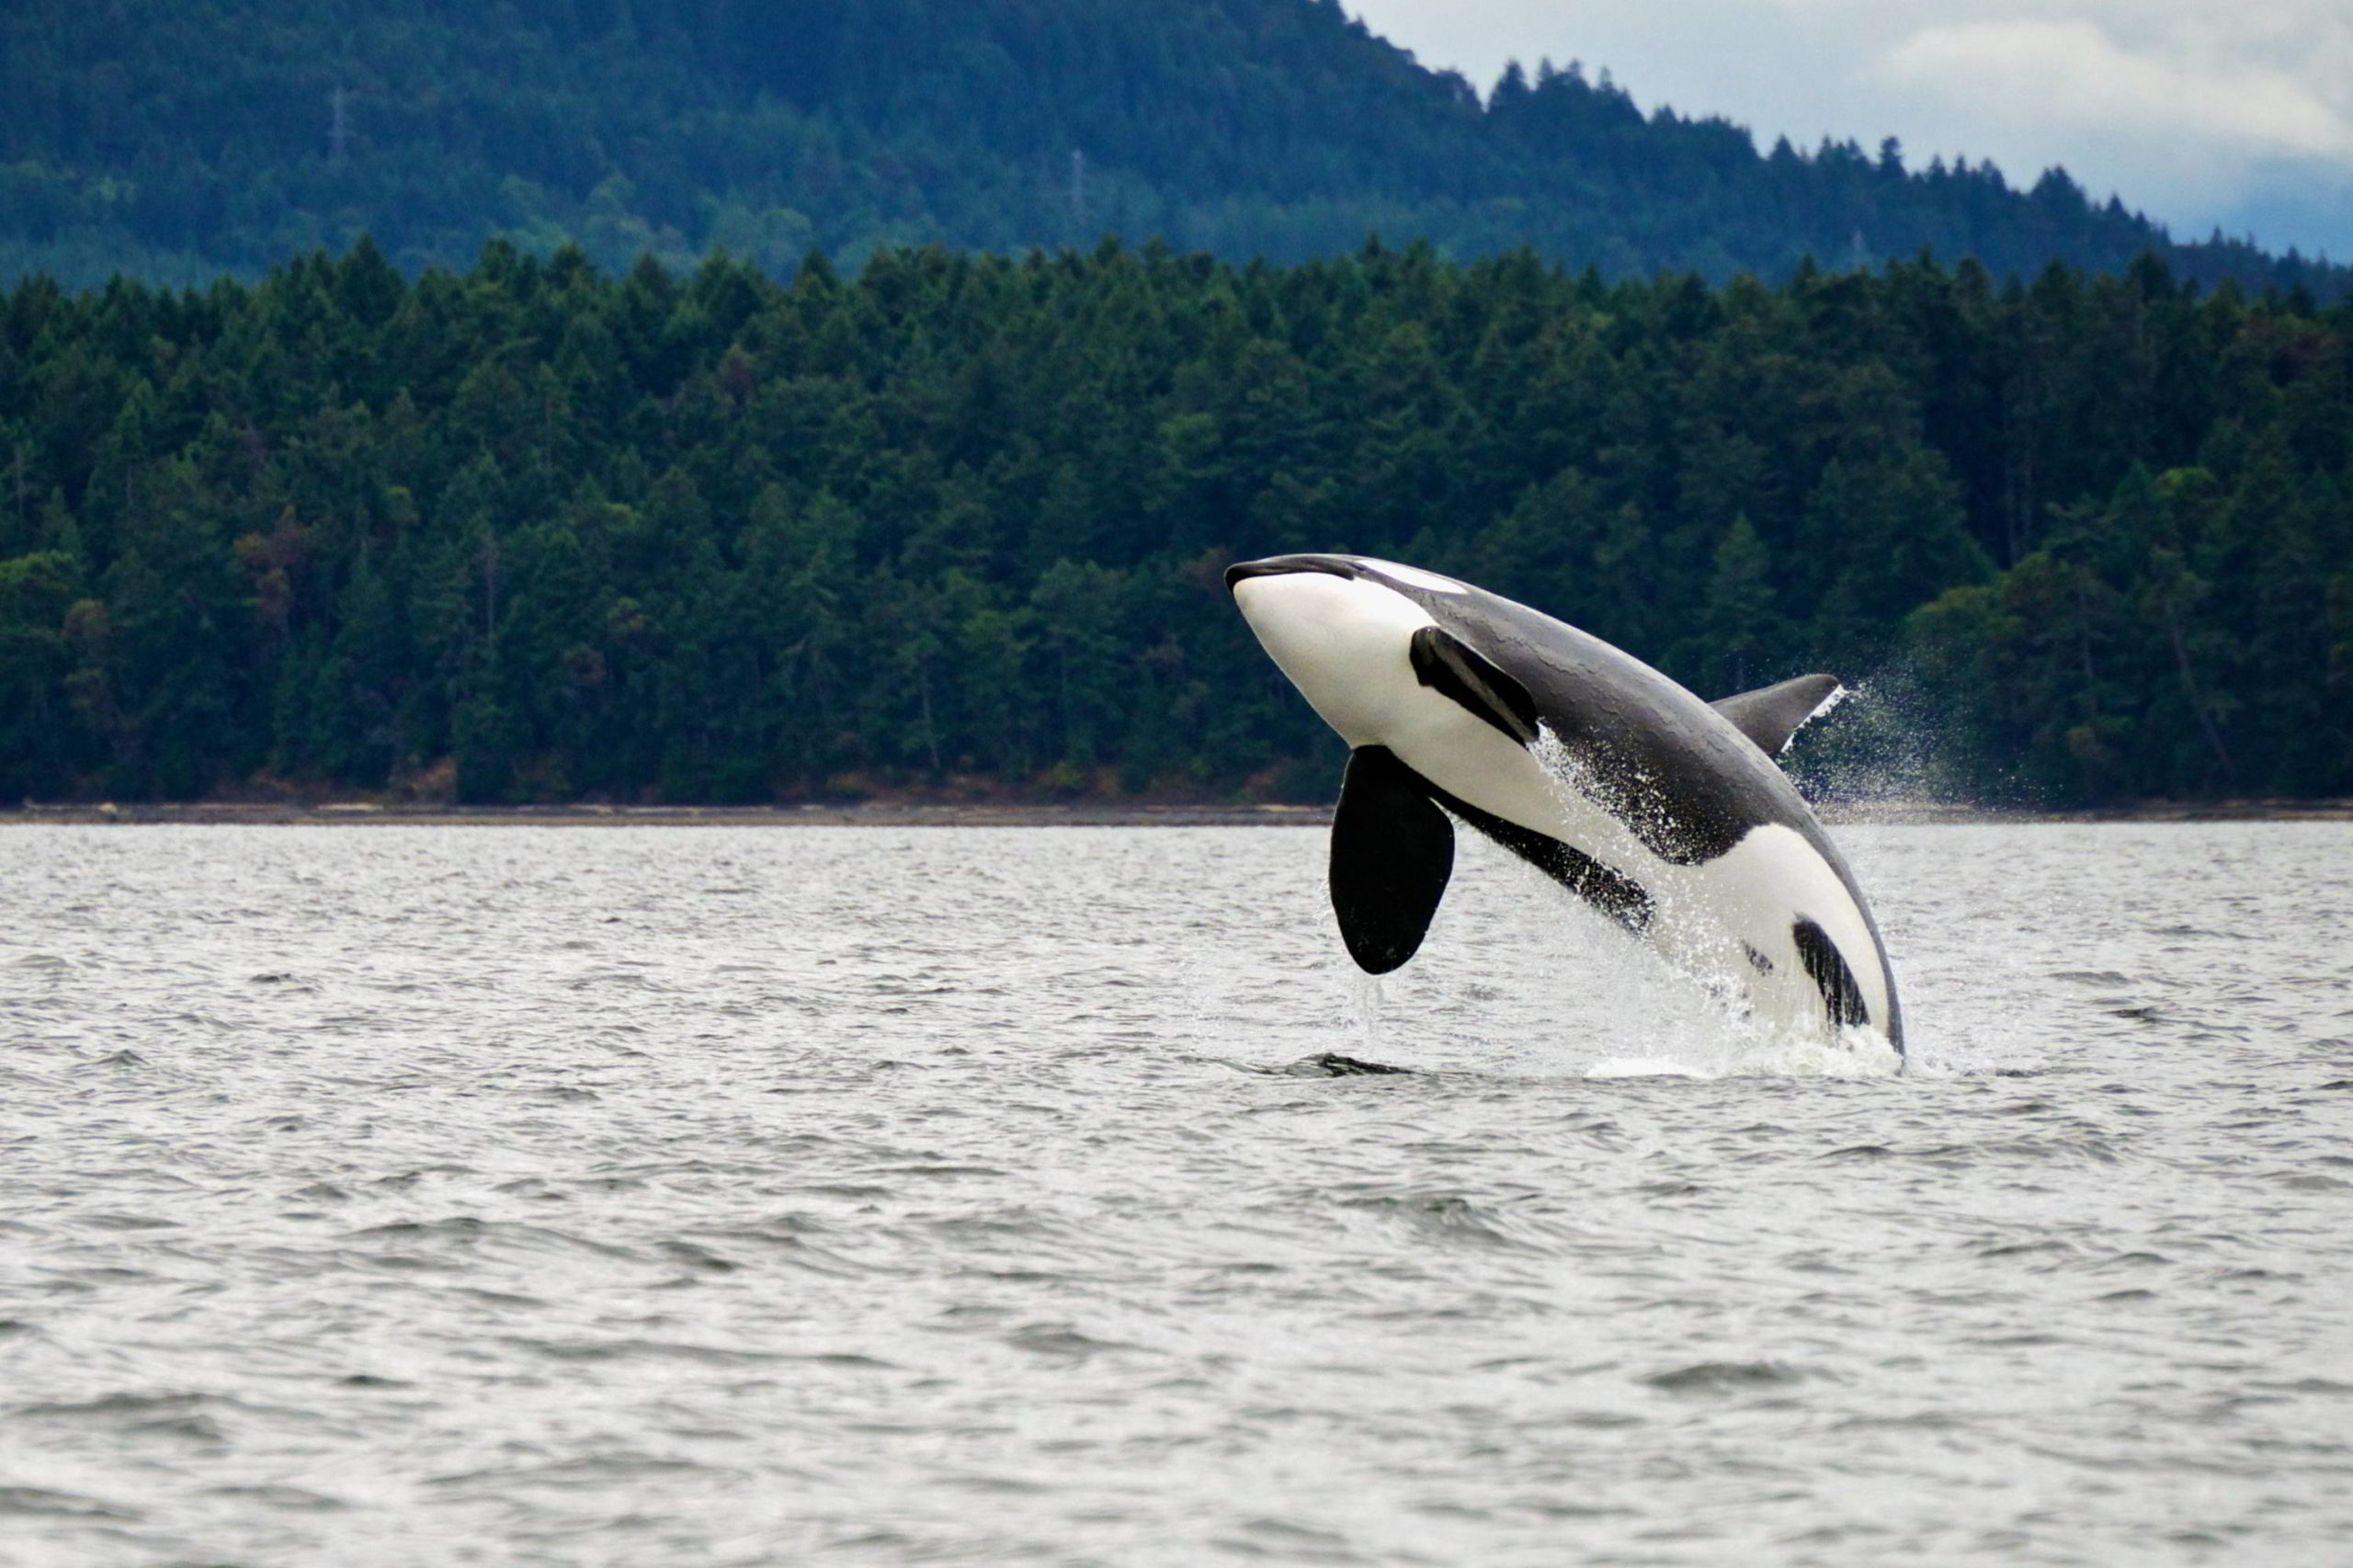 A southern resident Killer whale leaping out of the waters